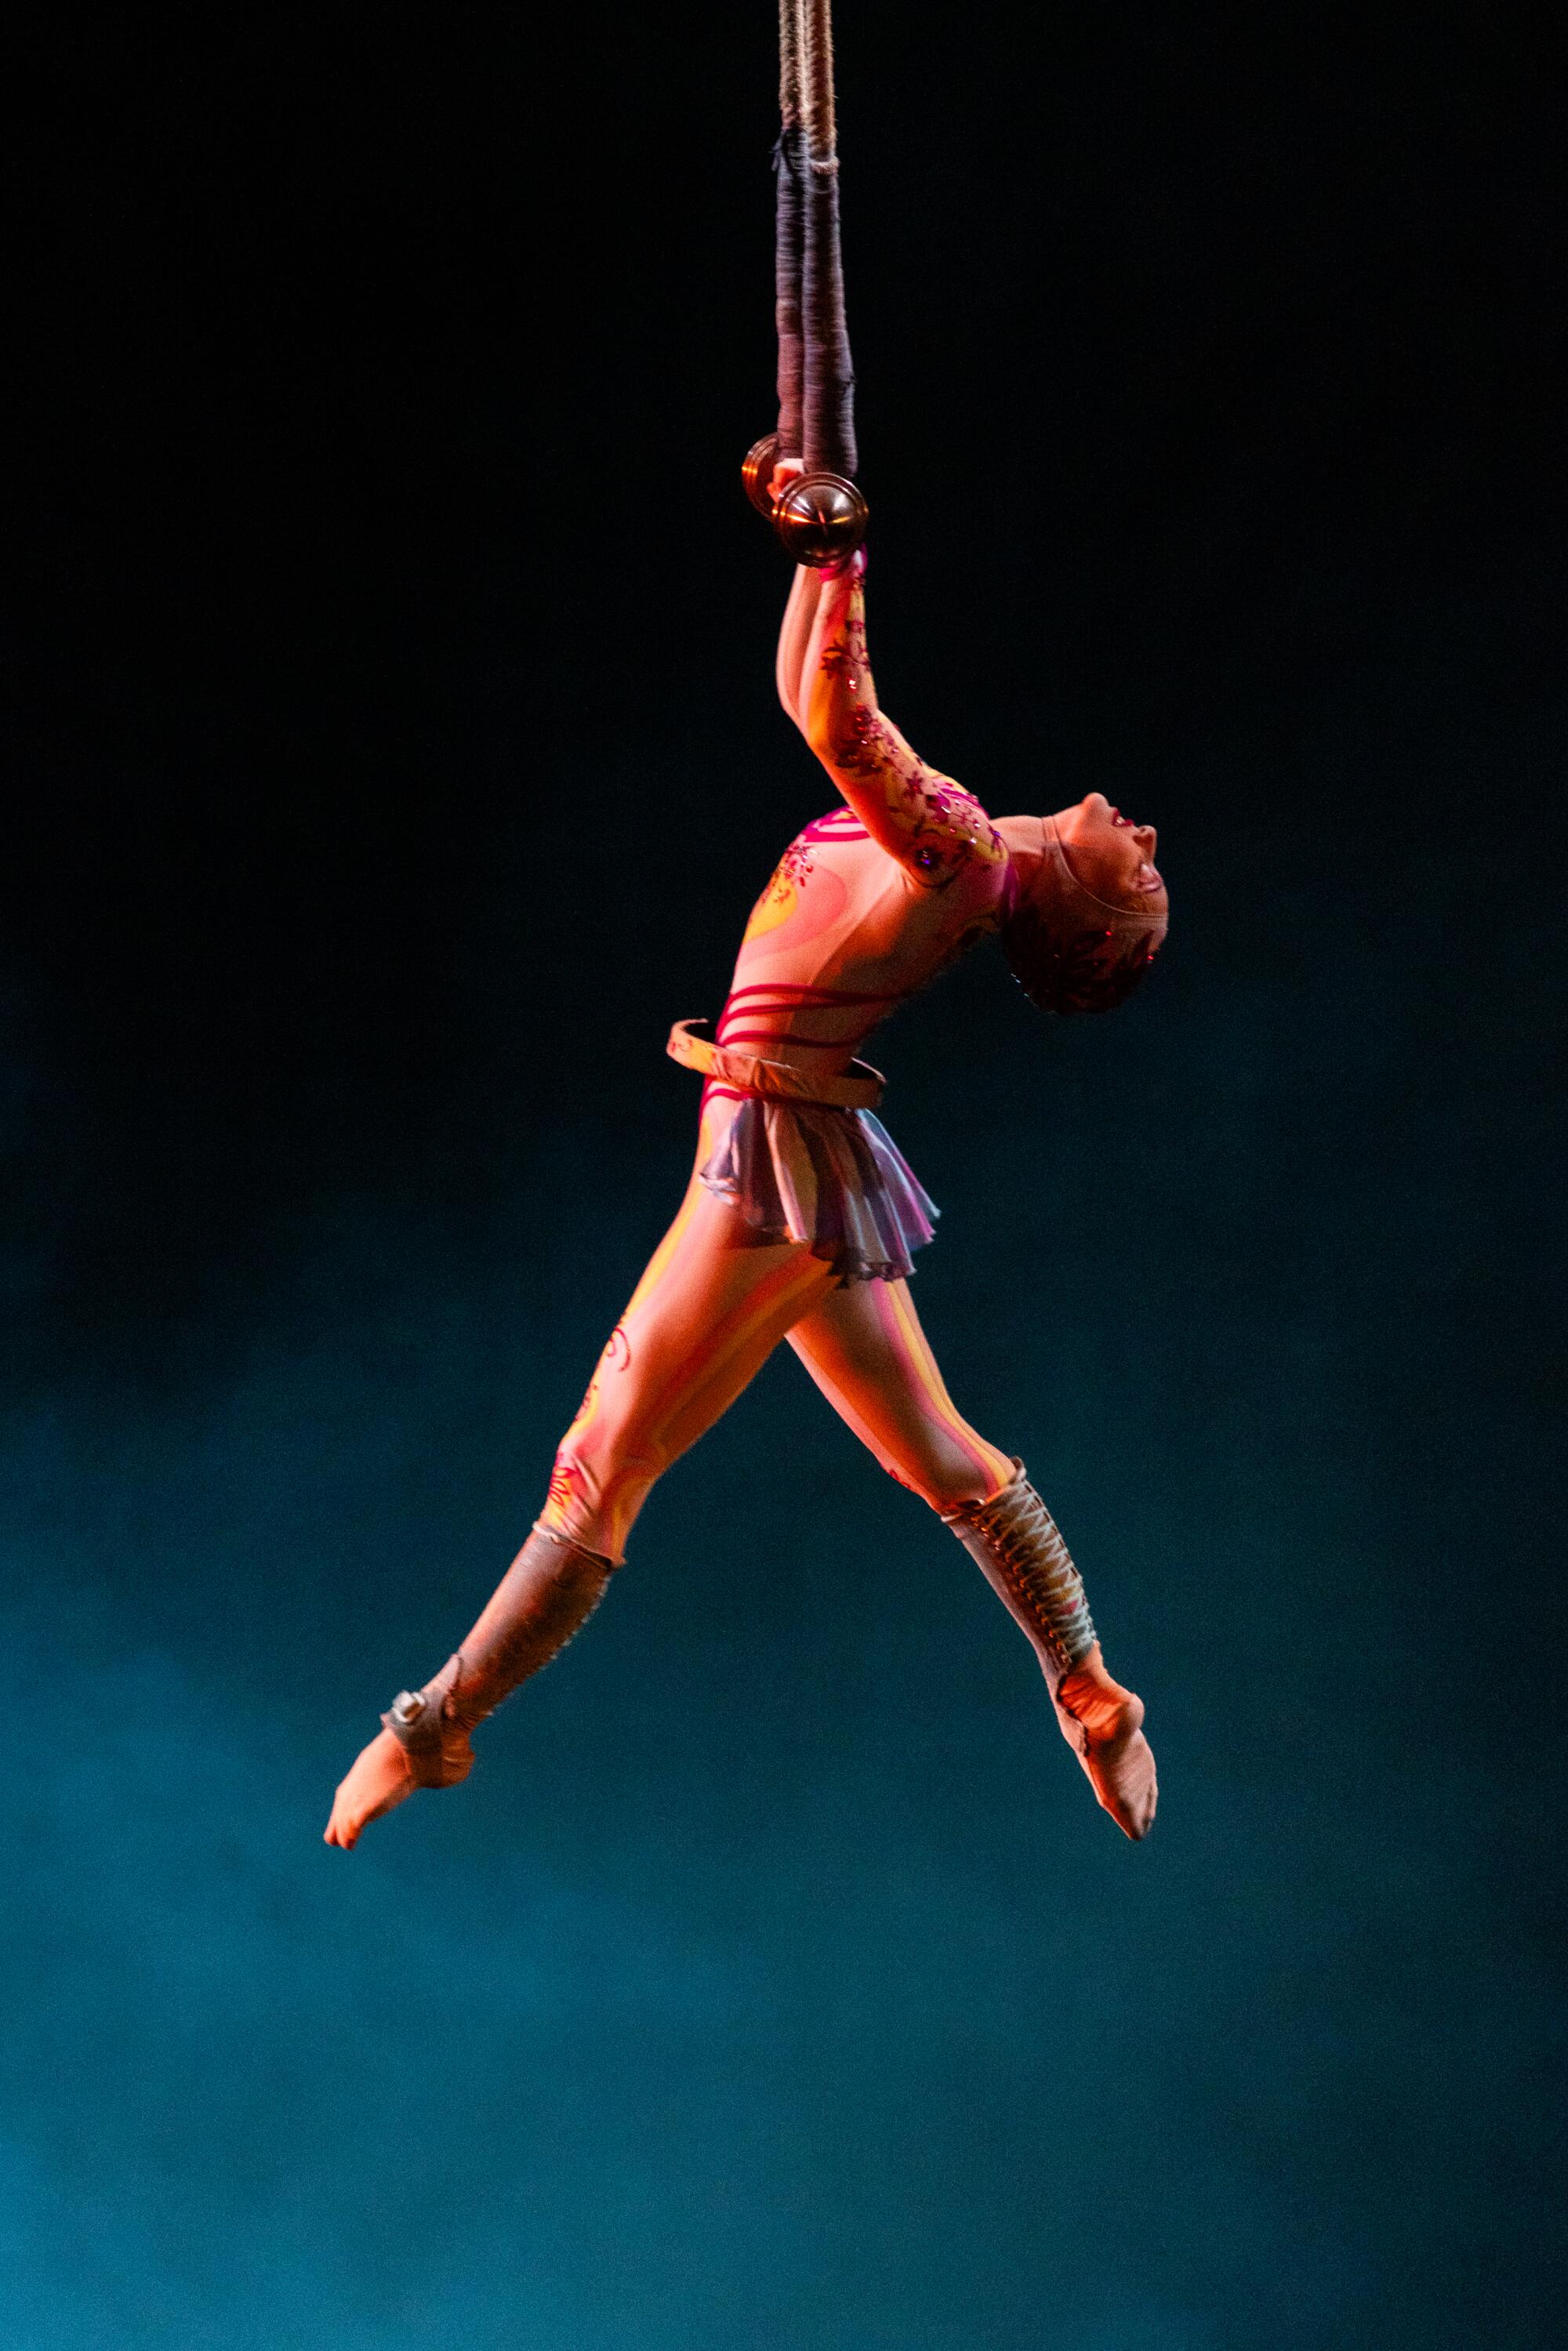 A trapeze artist performs in the air during Cirque du Soleil's "O."